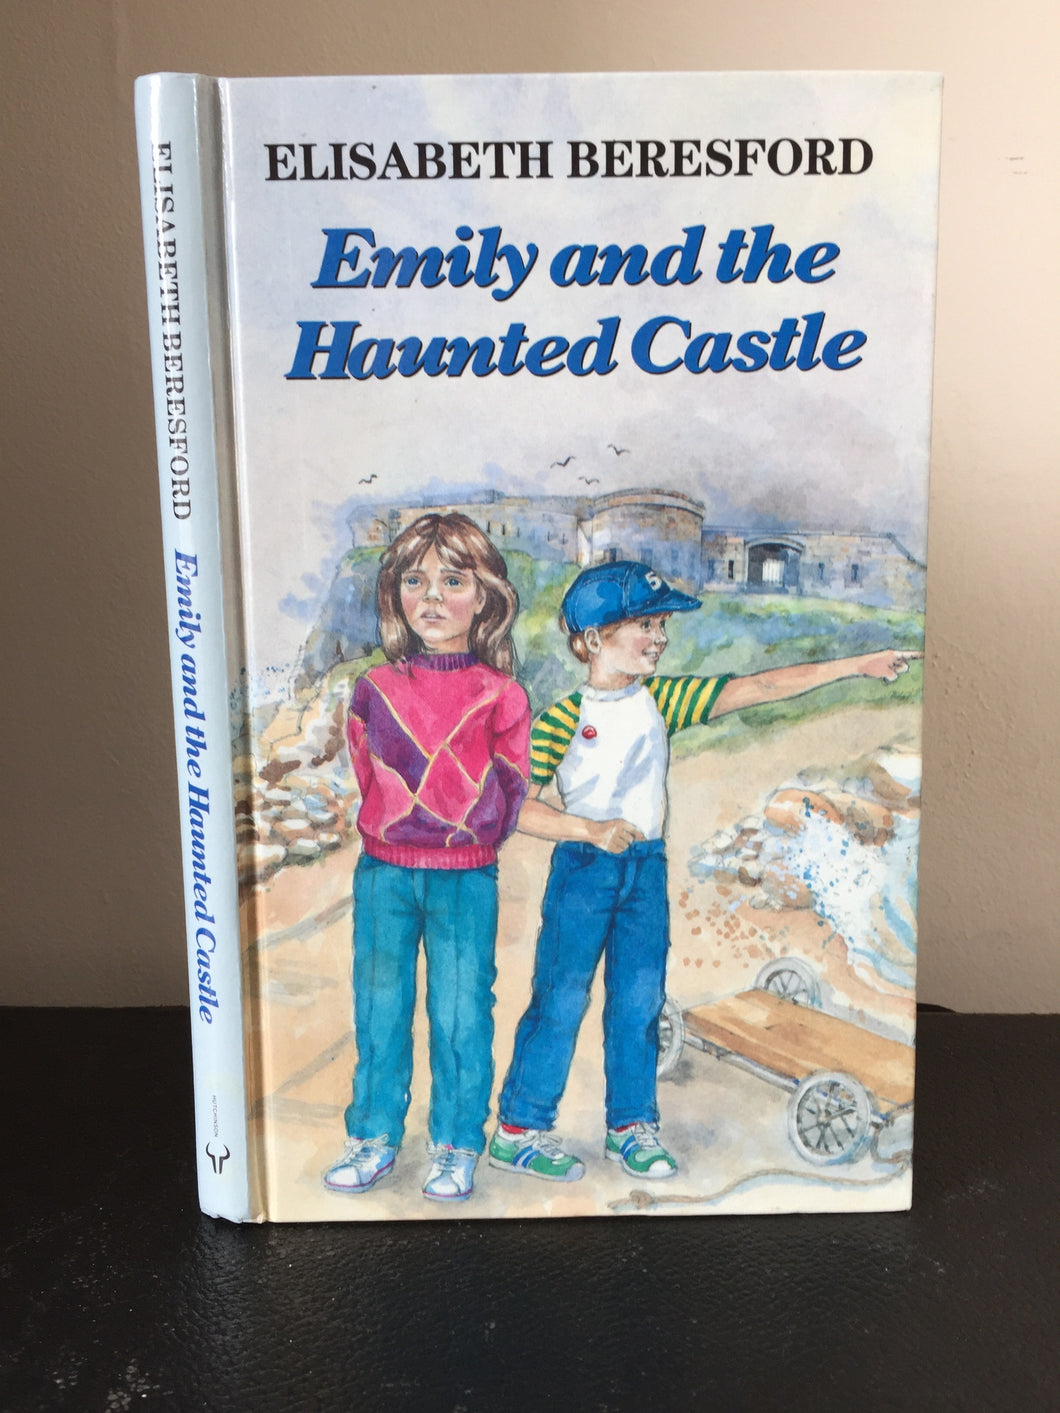 Emily and the Haunted Castle